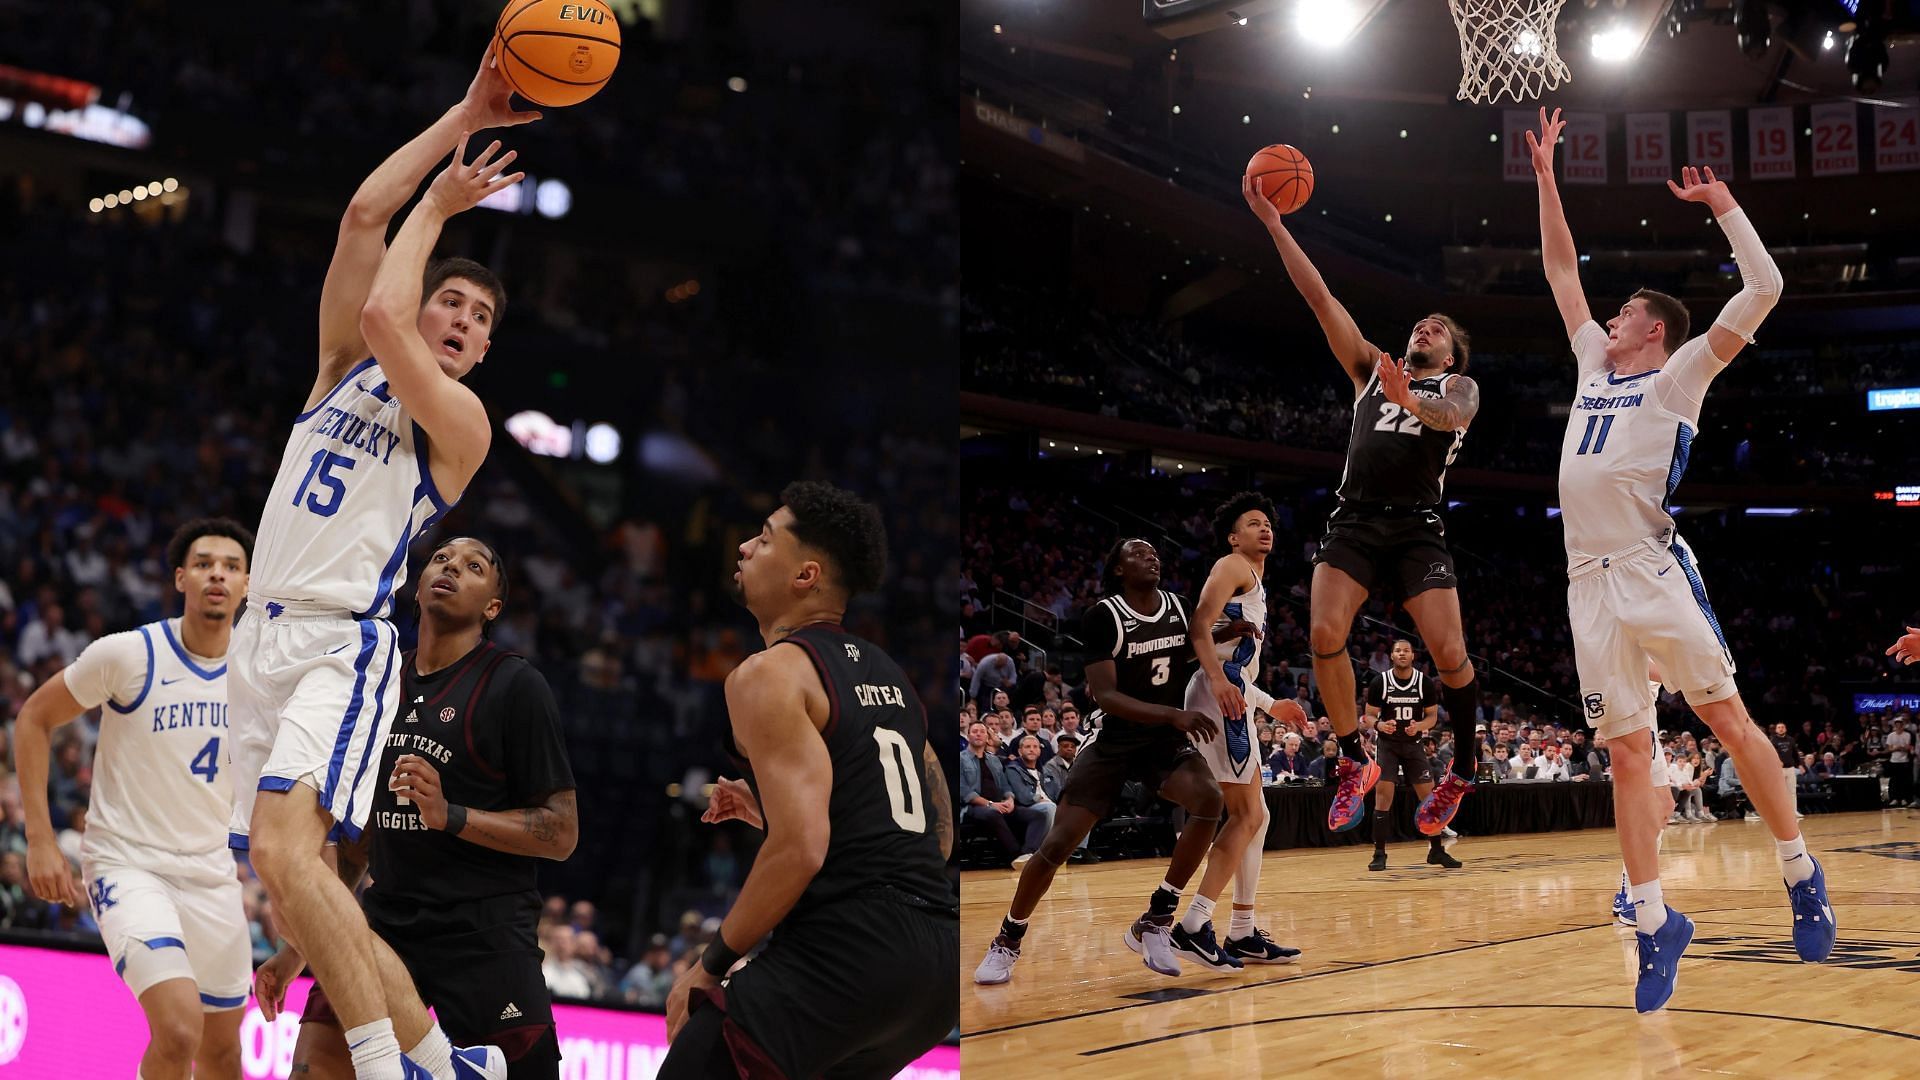 Reed Sheppard and Devin Carter were among the players with the highest recorded maximum vertical leap